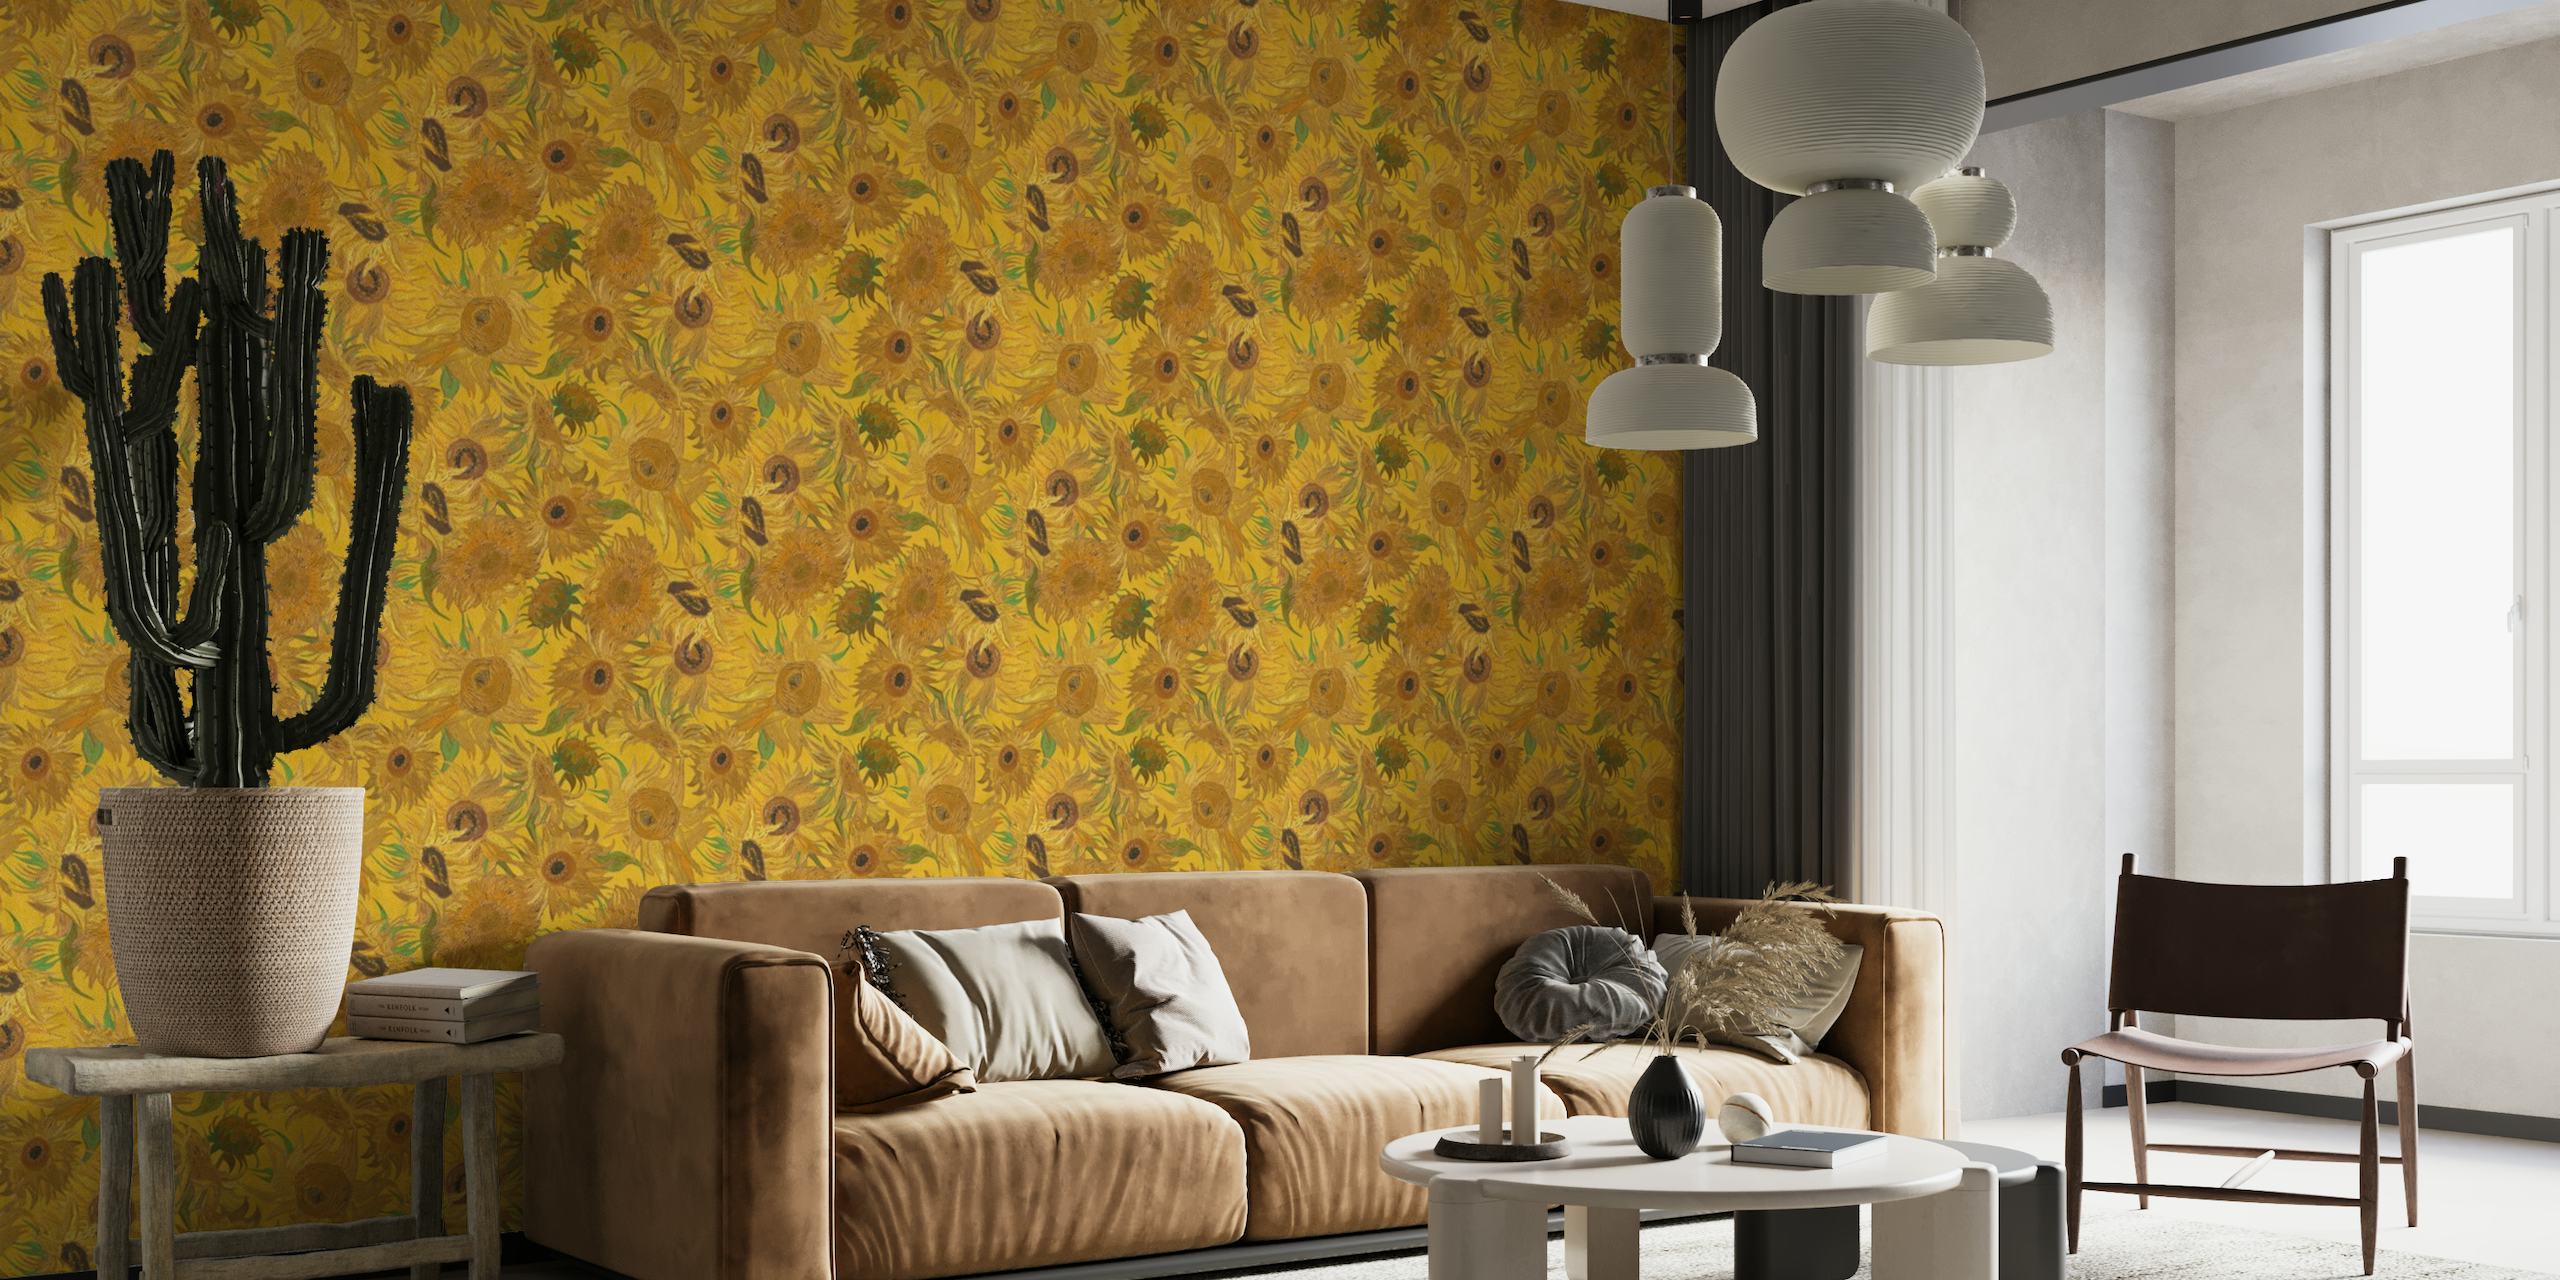 Van Gogh Sunflowers Pattern in yellow, green, rust and brown wallpaper